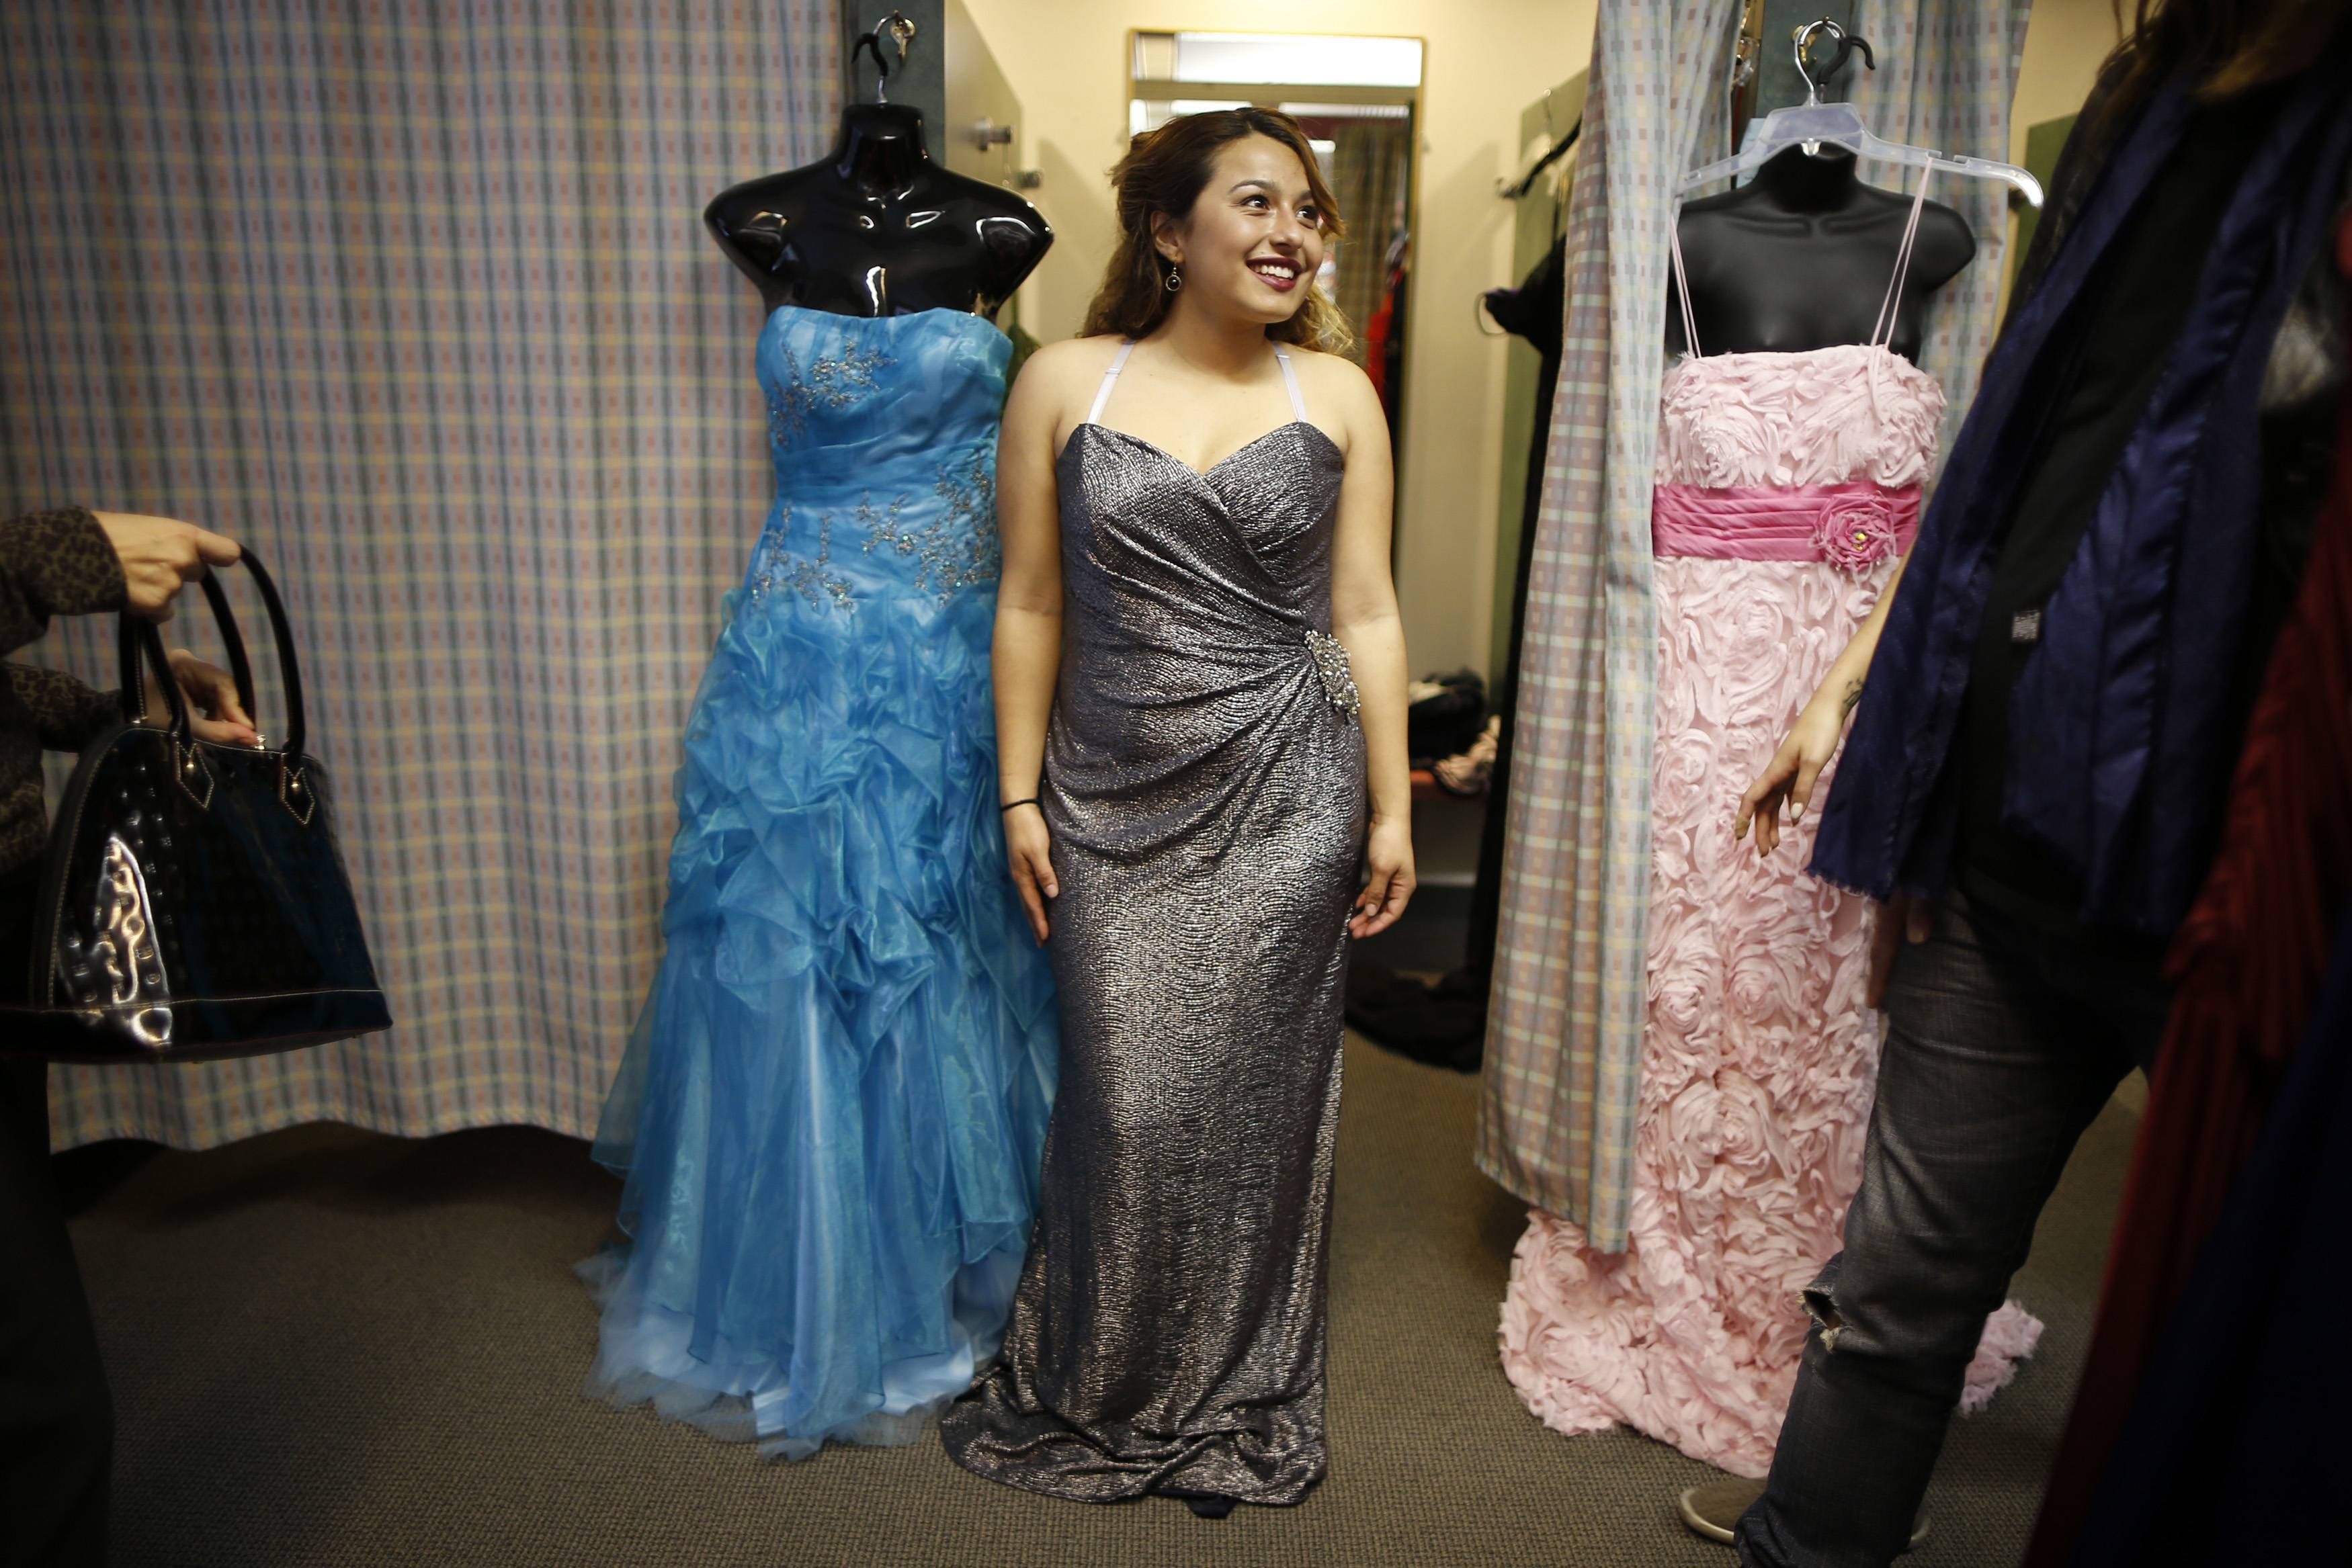 California event provides free prom dress for homeless and low income school girls